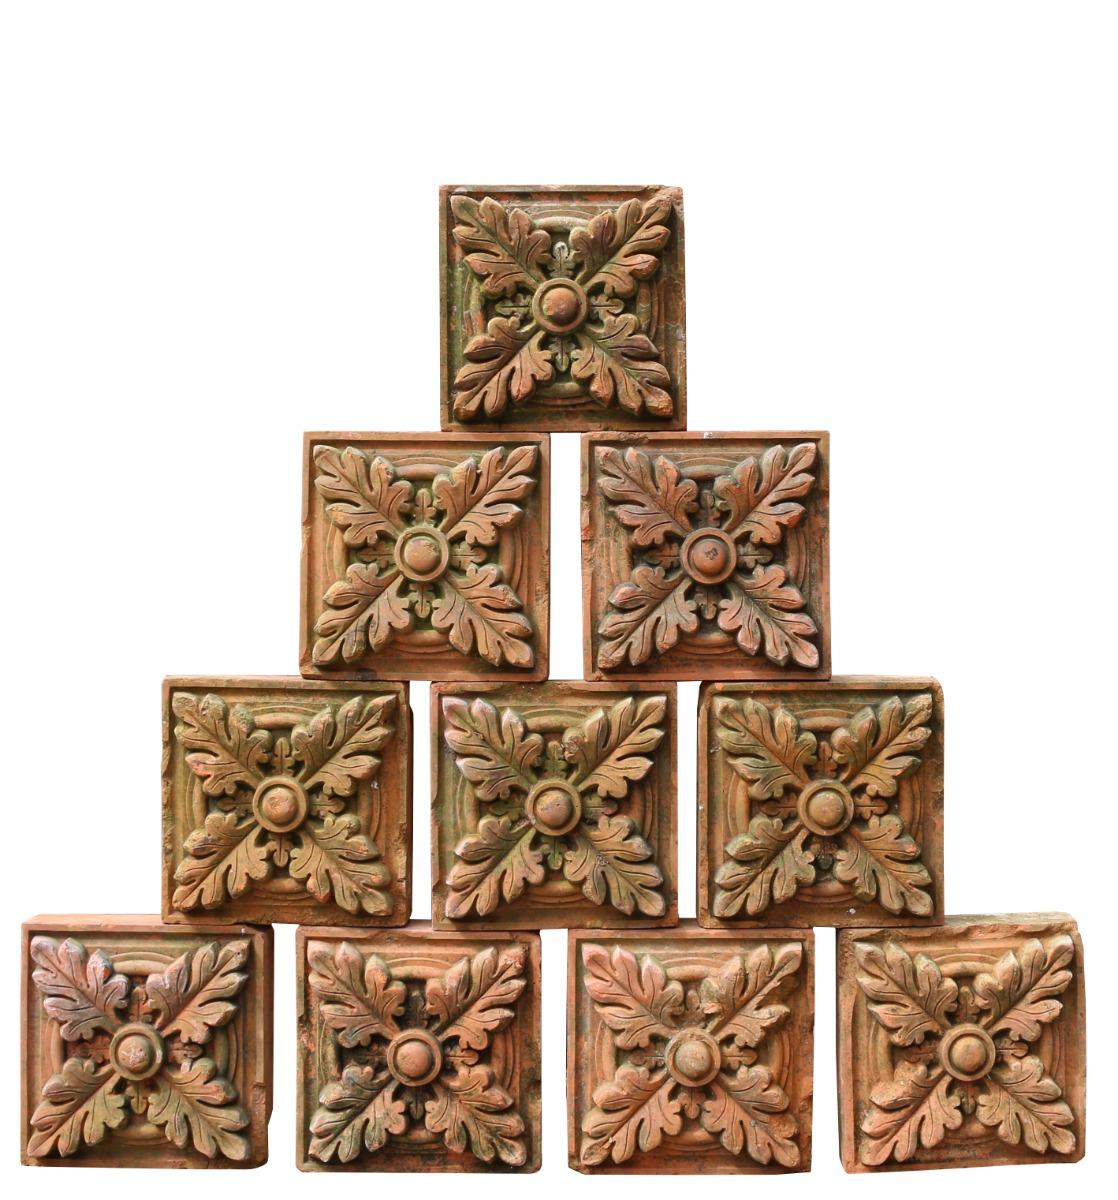 A set of ten matching reclaimed decorative terracotta bricks manufactured by the ‘Hathern Station Brick Company’, Established 1874. Each brick is clearly stamped with the makers name.

Additional dimensions:

Weight 70 kg for all 10 bricks.